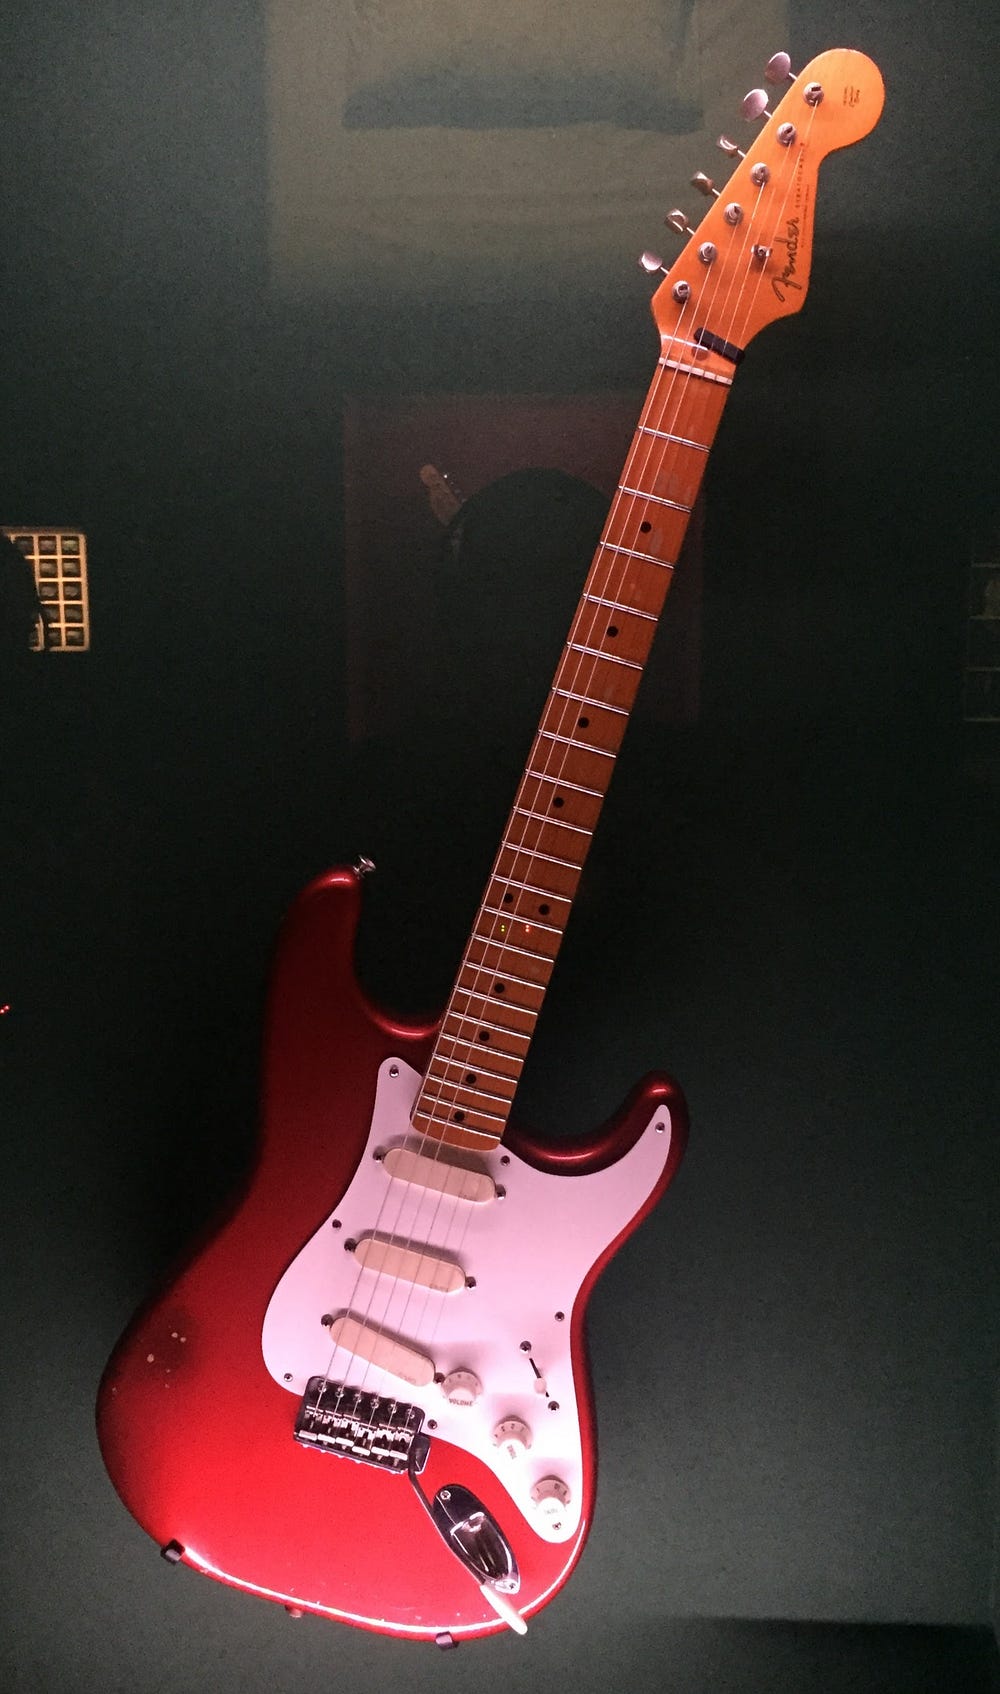 New Guitar Day: Fender USA '57 Vintage Reissue Stratocaster Candy Apple Red  with lacquered maple neck and fretboard | by Jonathan Thomas | Red Chair  Riffs | Medium